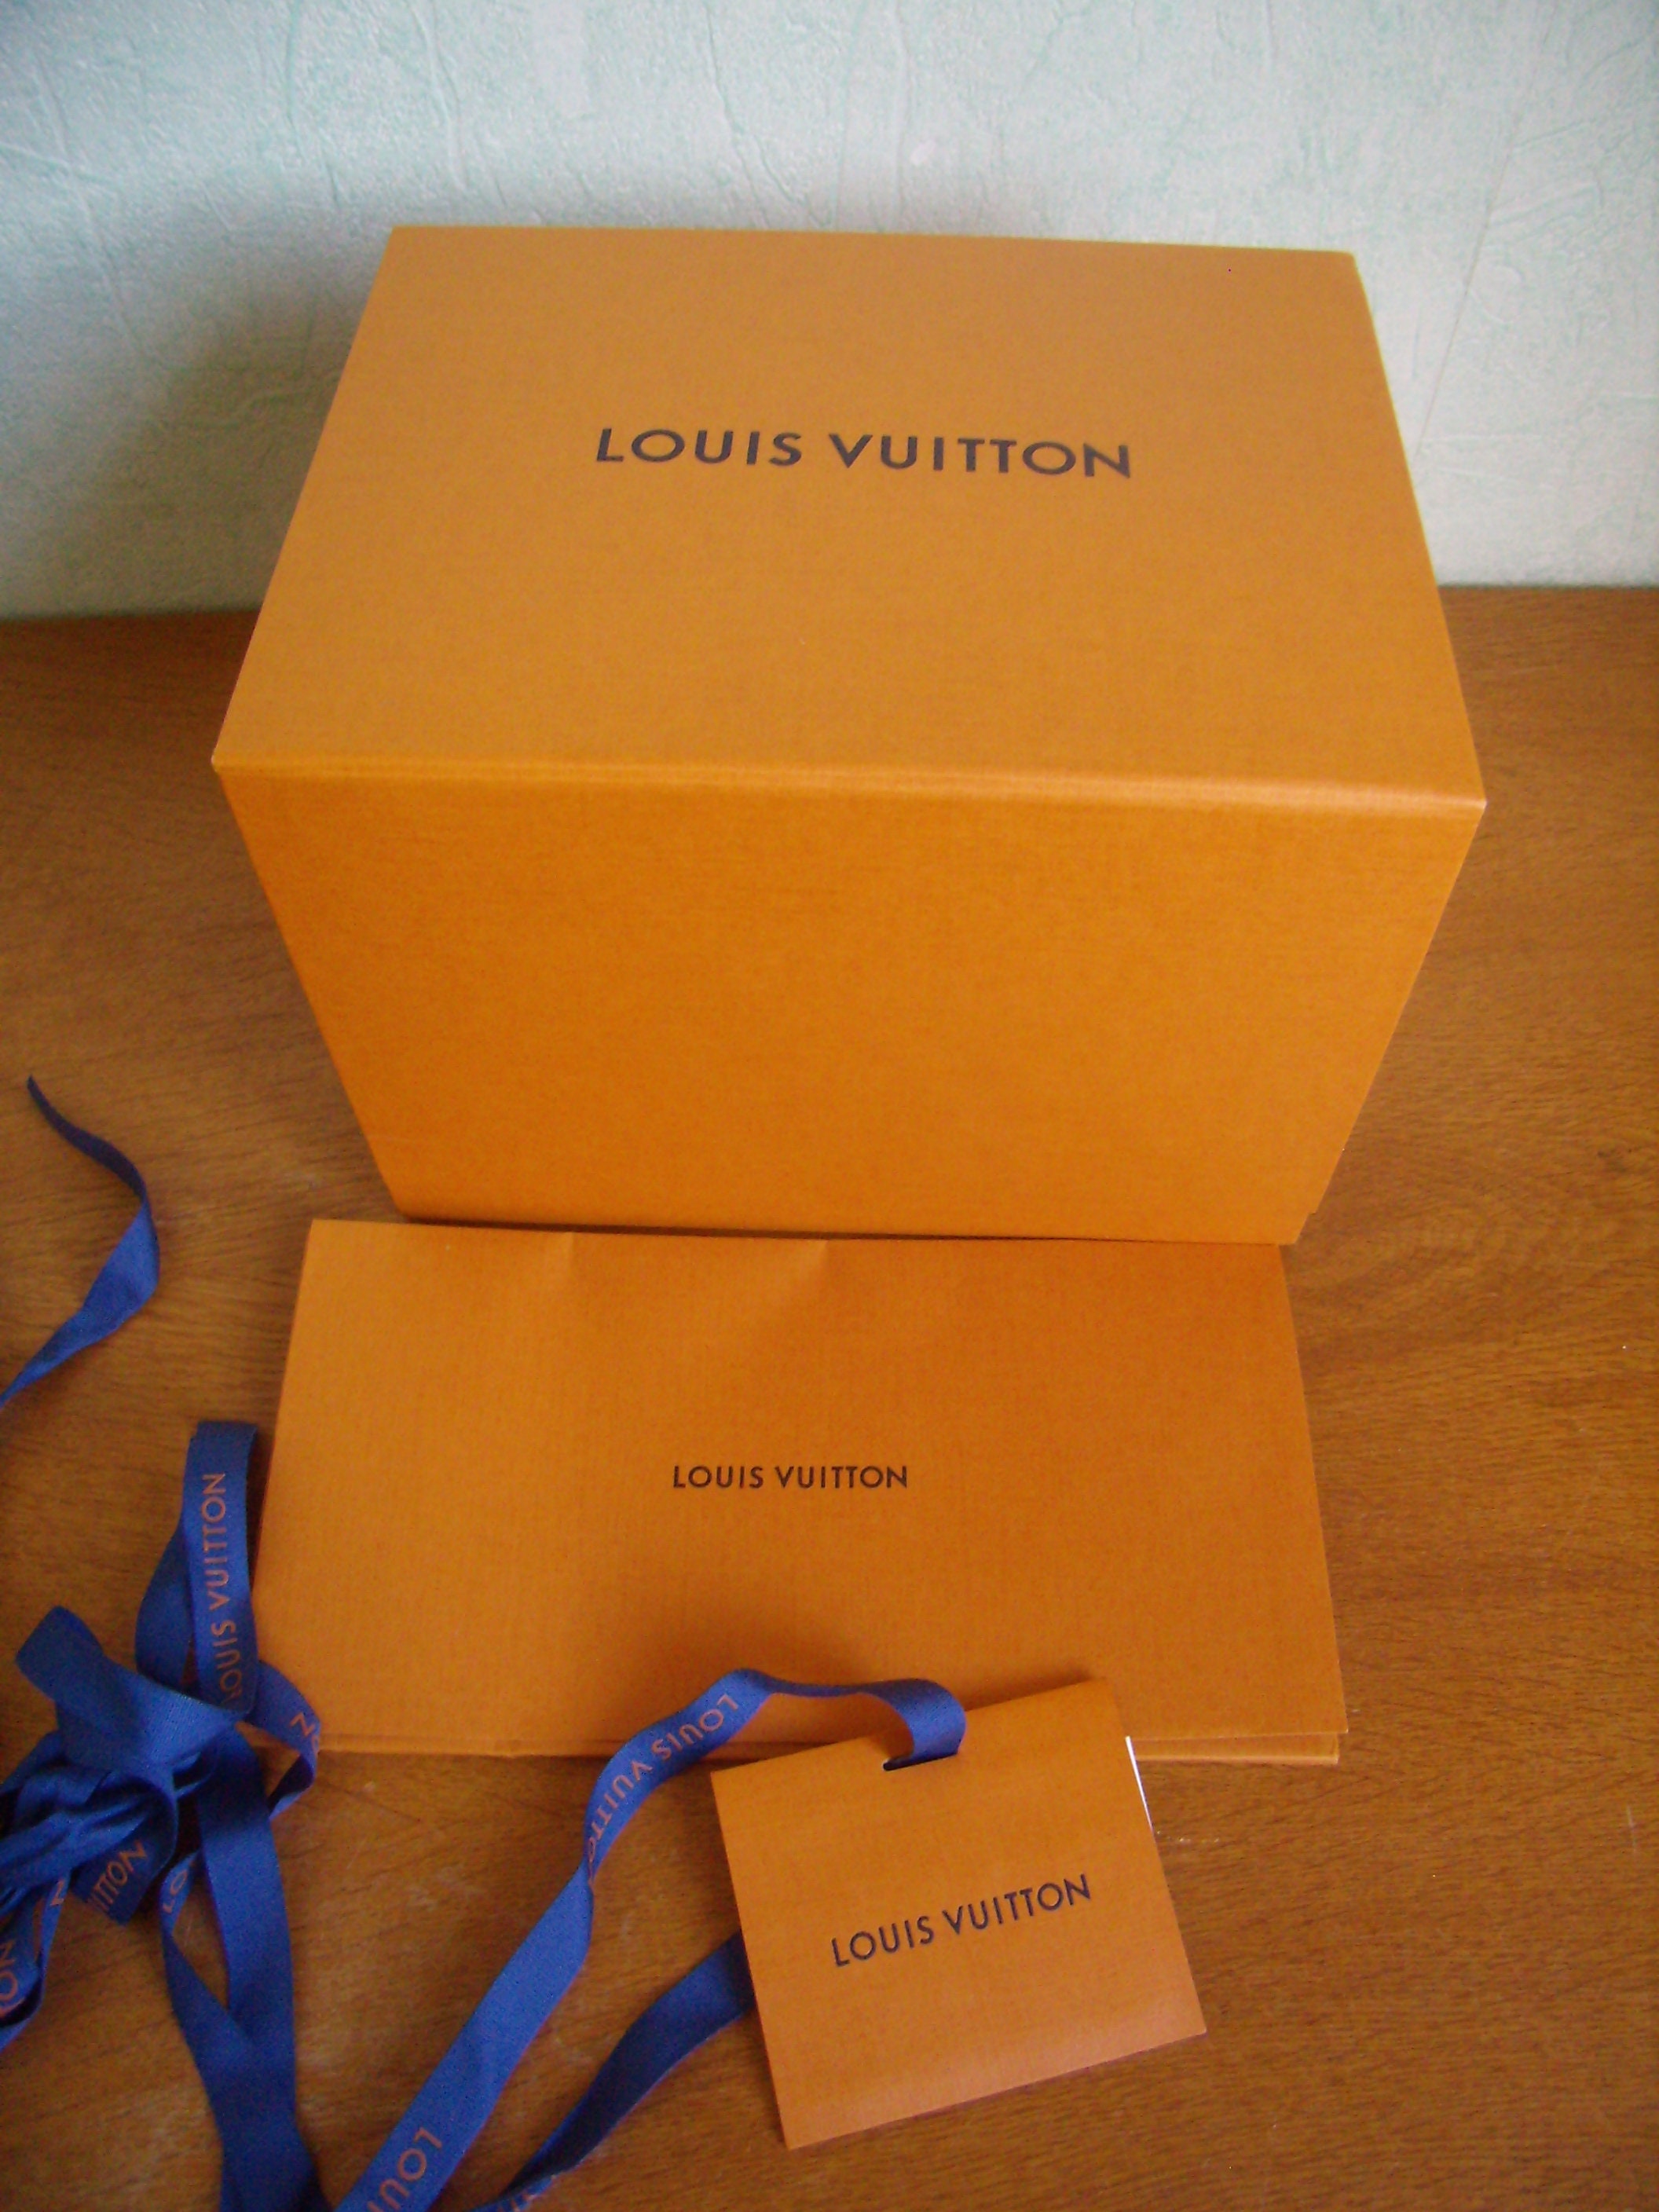 Authentic LOUIS VUITTON Empty Gift Box, Bag, Ribbon And Envelope W